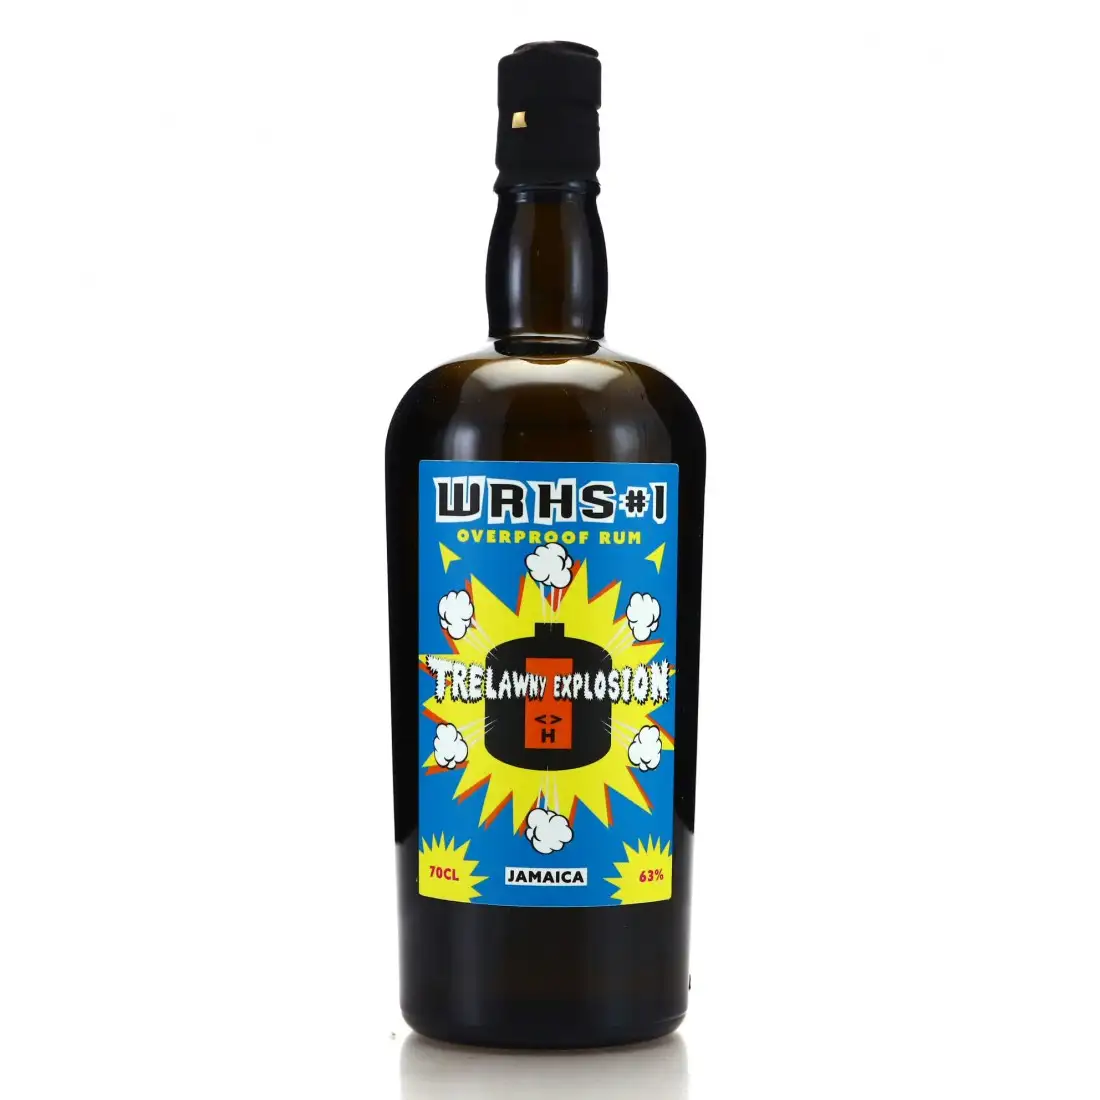 Image of the front of the bottle of the rum Overproof Rum Trelawny Explosion <>H